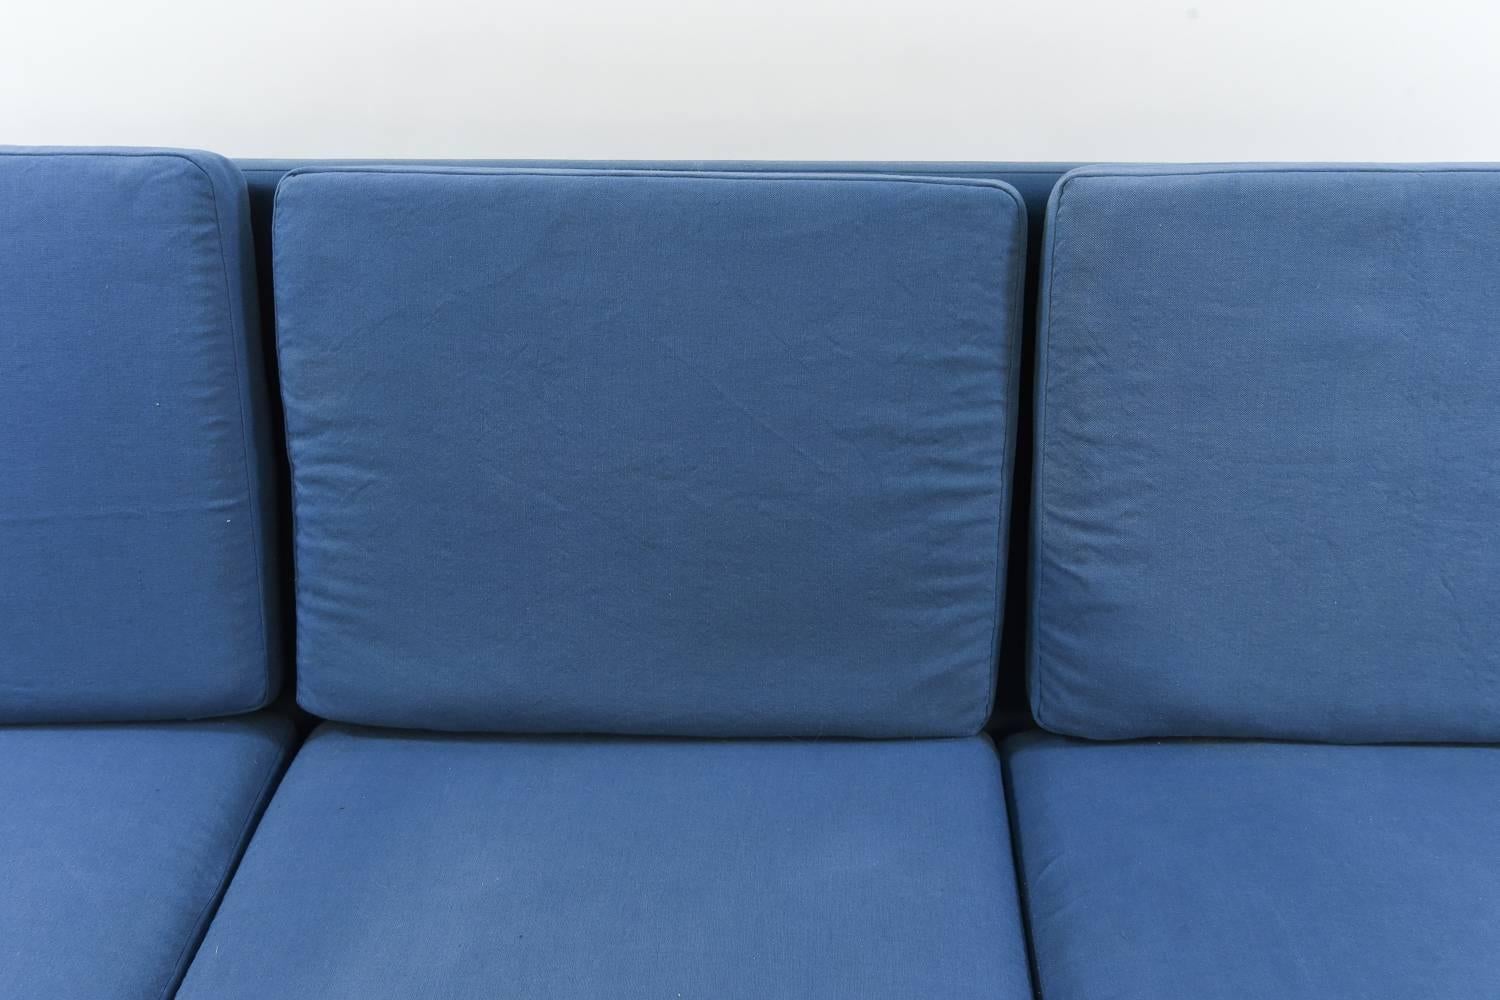 This eye-catching Danish midcentury sofa features a great rosewood frame and is upholstered in striking blue cotton. This would be a perfect pop of color to brighten up a living space!